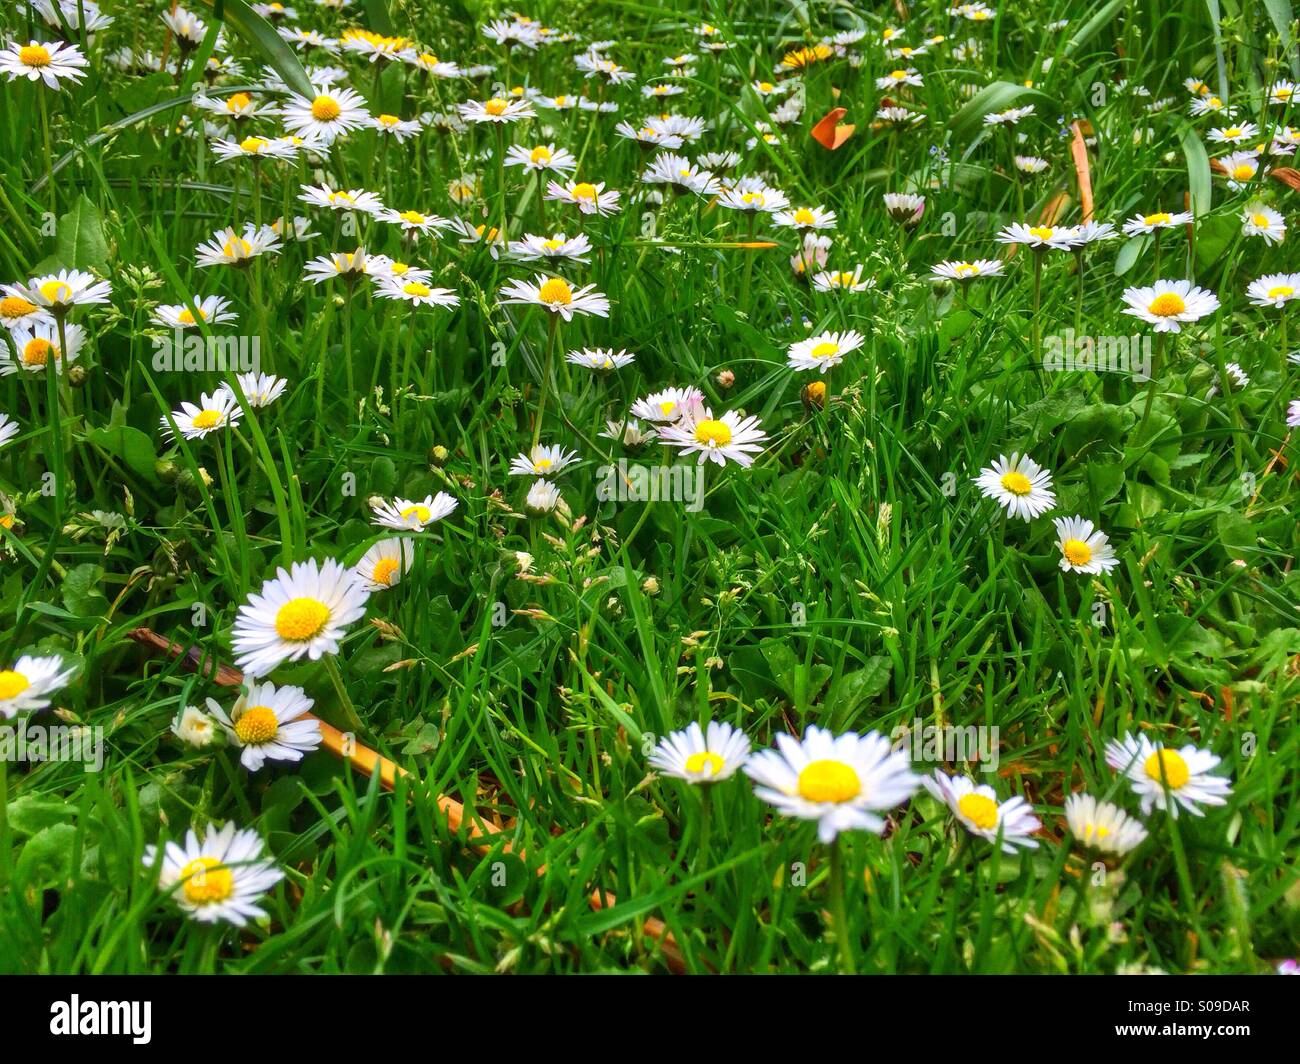 Daisy's with grass in Spring Stock Photo